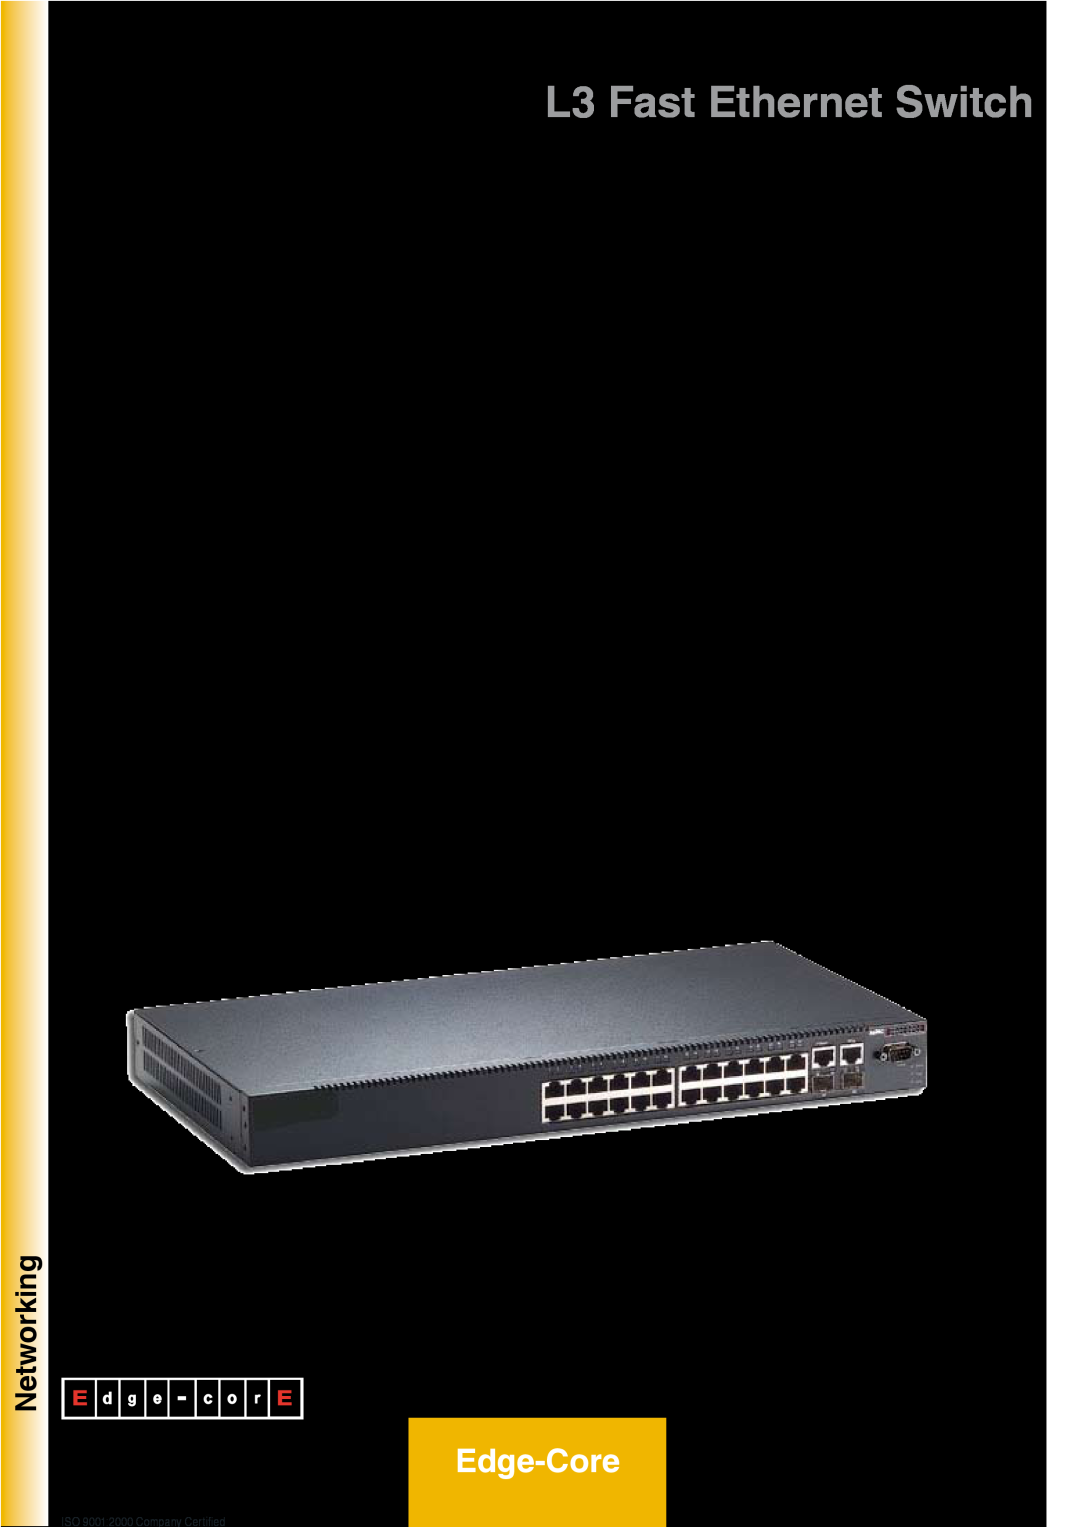 Atlantis Land A07-ES3628C manual L3 Fast Ethernet Switch, Edge-Core, Networking, ISO 90012000 Company Certified 